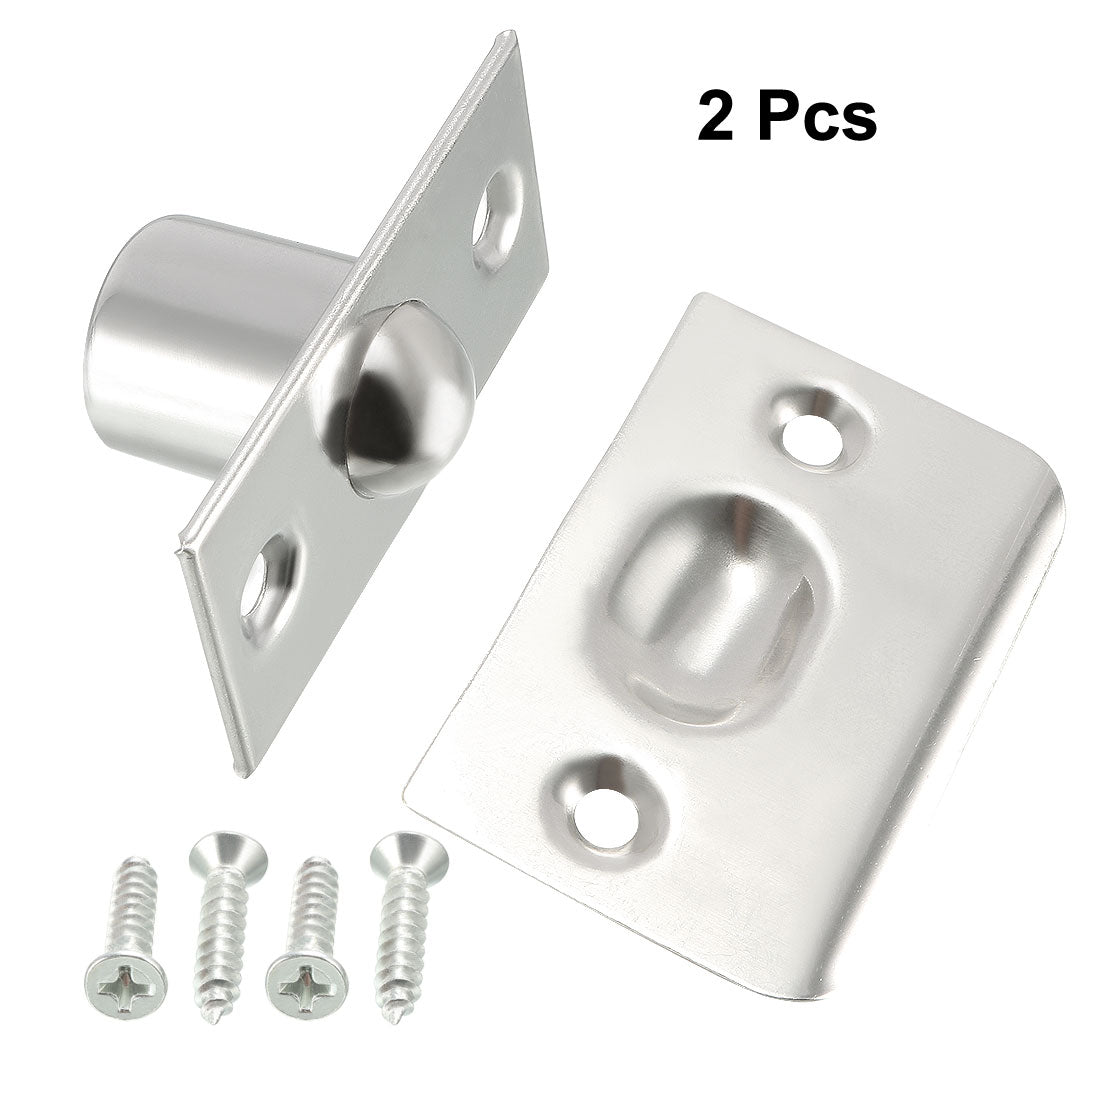 uxcell Uxcell Closet Door Drive-in Large Ball Catch Stainless Steel With Strike Plate Screws 2PCS